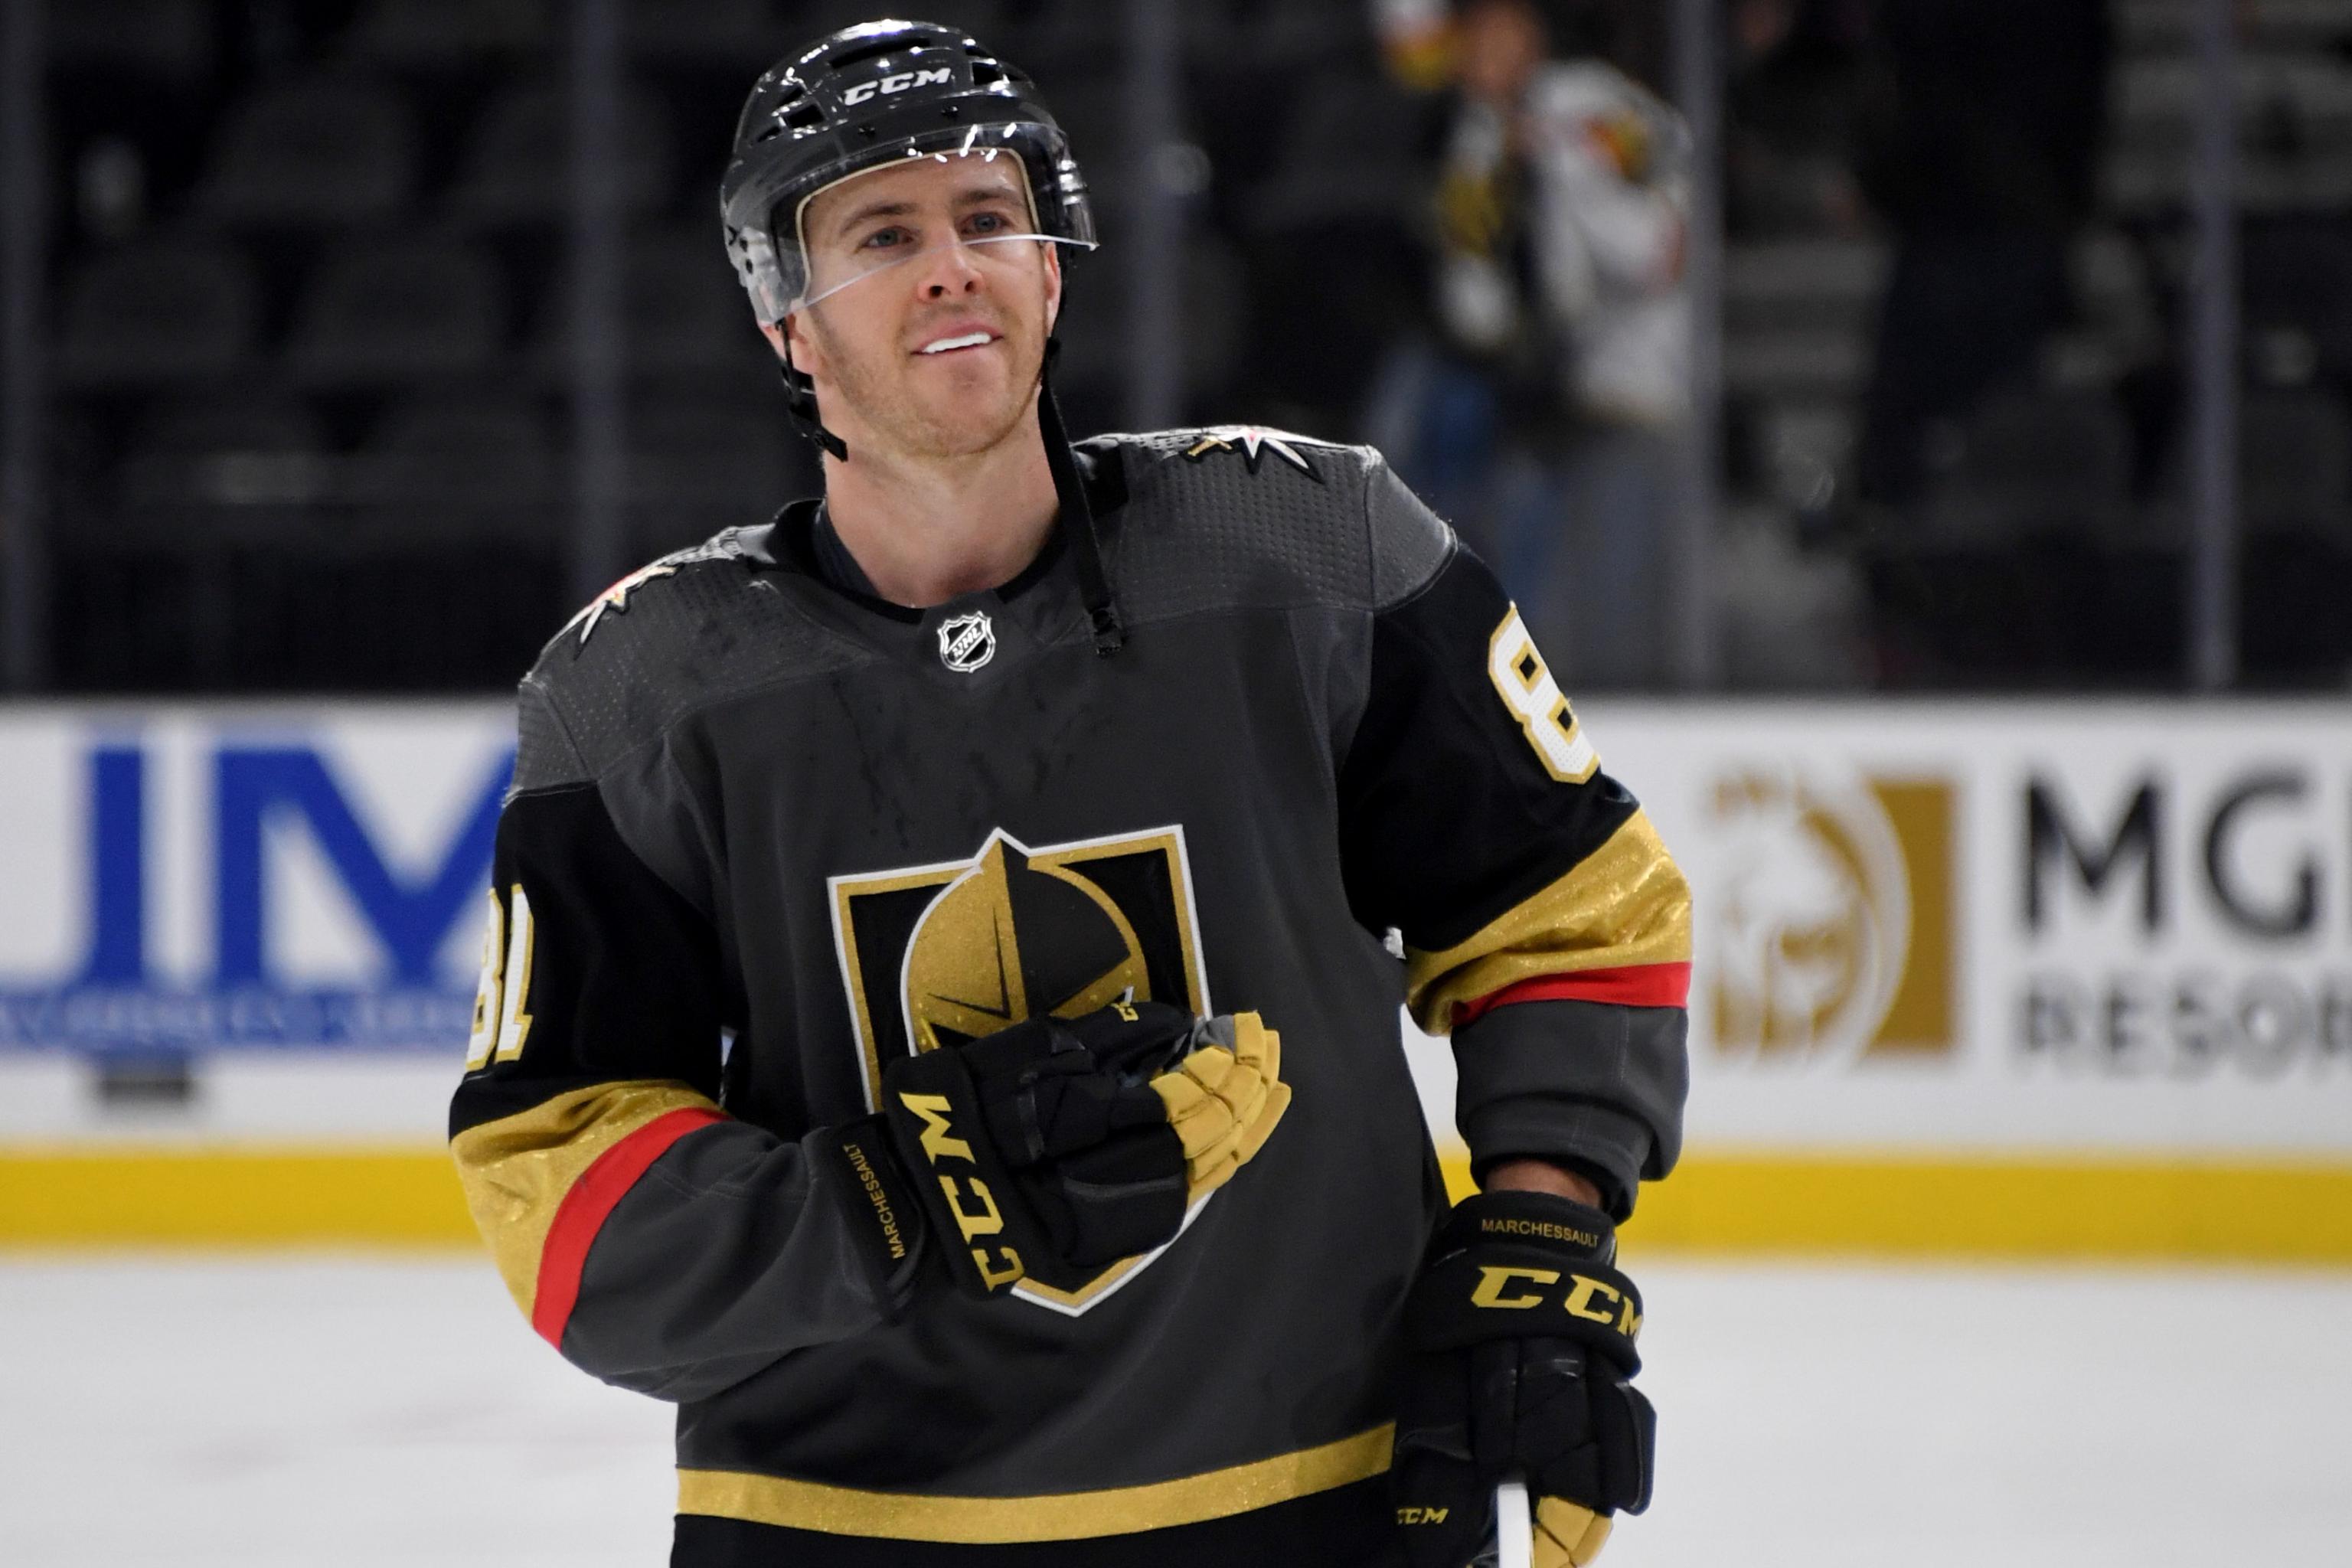 What We Know About NHL Star Jonathan Marchessault's Wife Alexandra